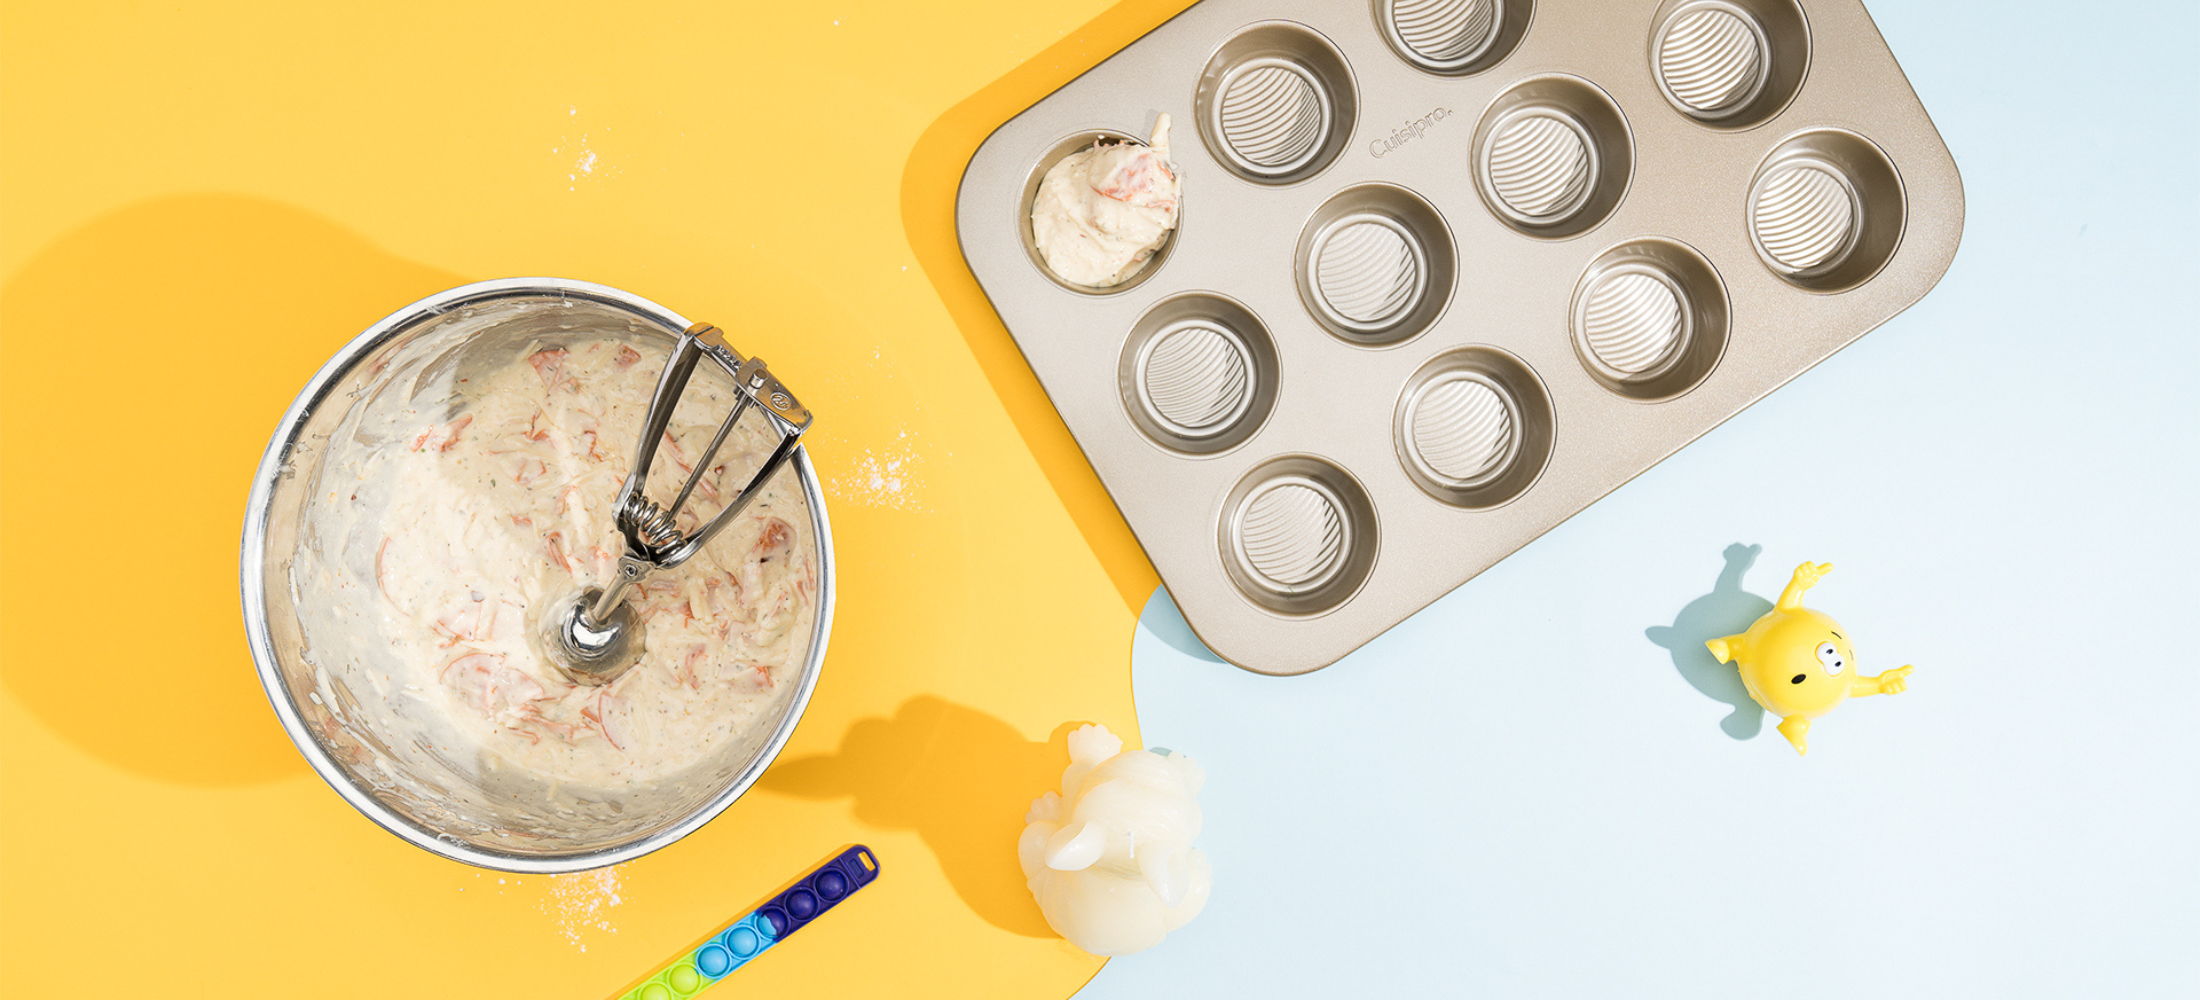 Cuisipro pizza muffin recipe, batter being scooped into Cuisipro Muffin tin, using Cuisipro disher scoop.